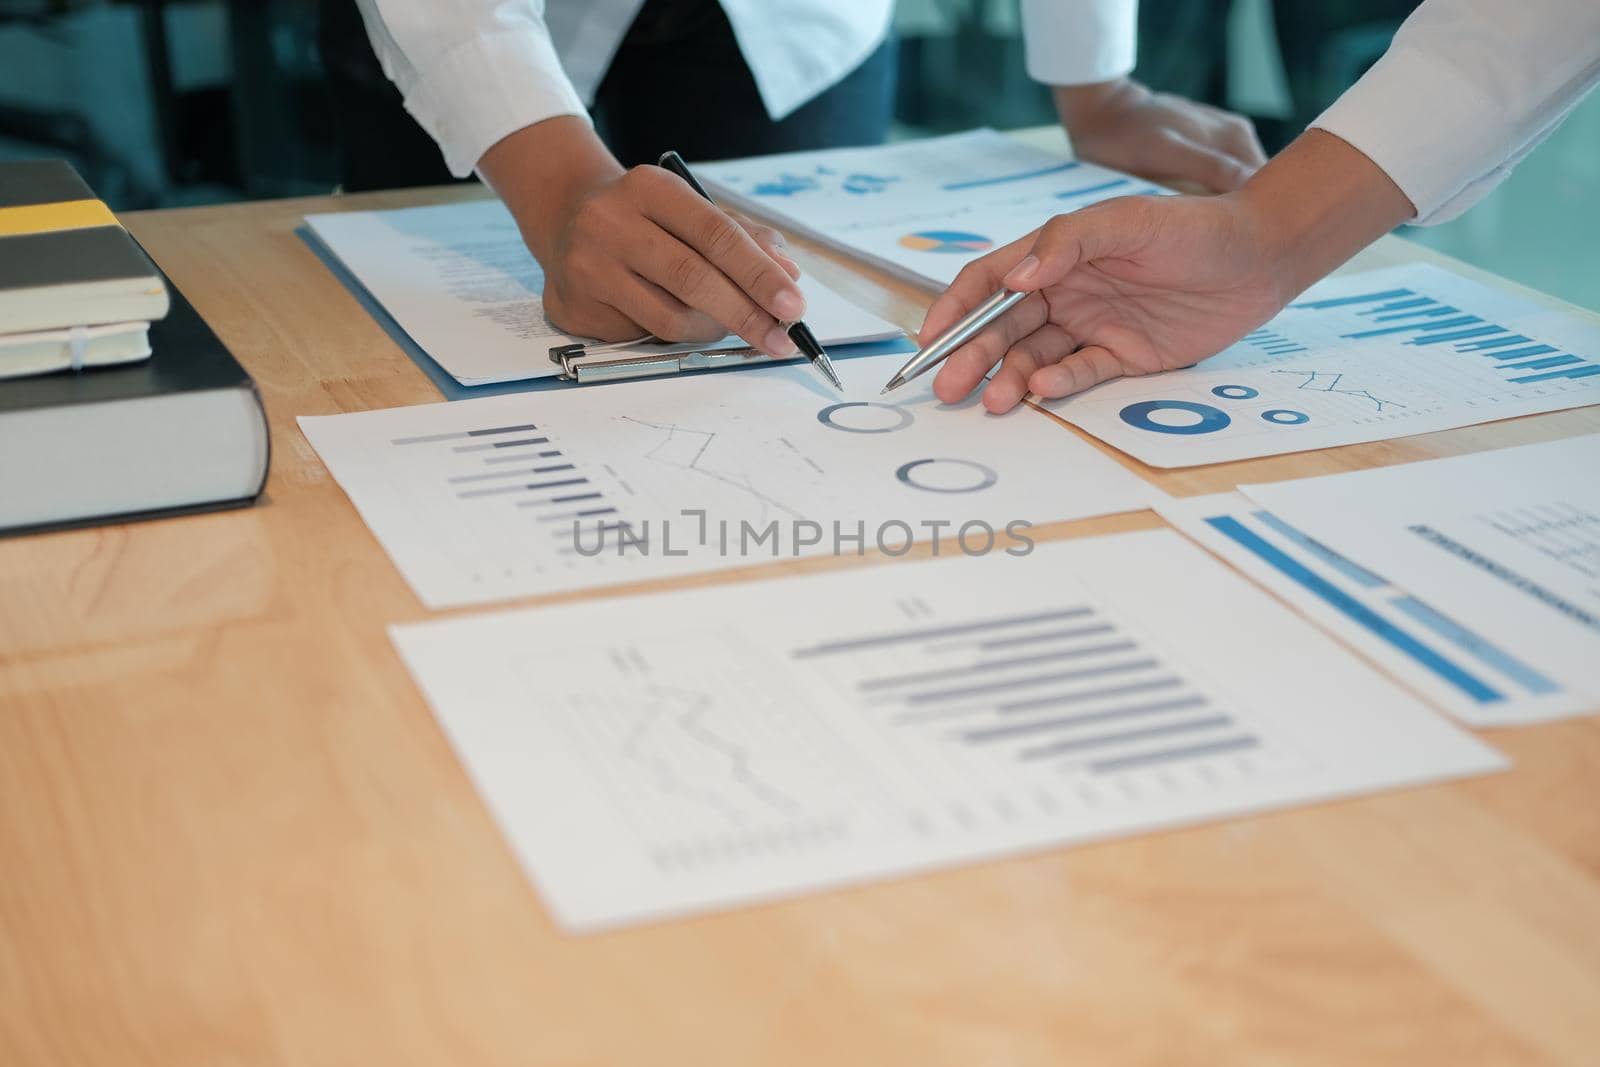 financial adviser analyzing performance revenue with investor. business people discussing in meeting. businessman working with co-worker team.